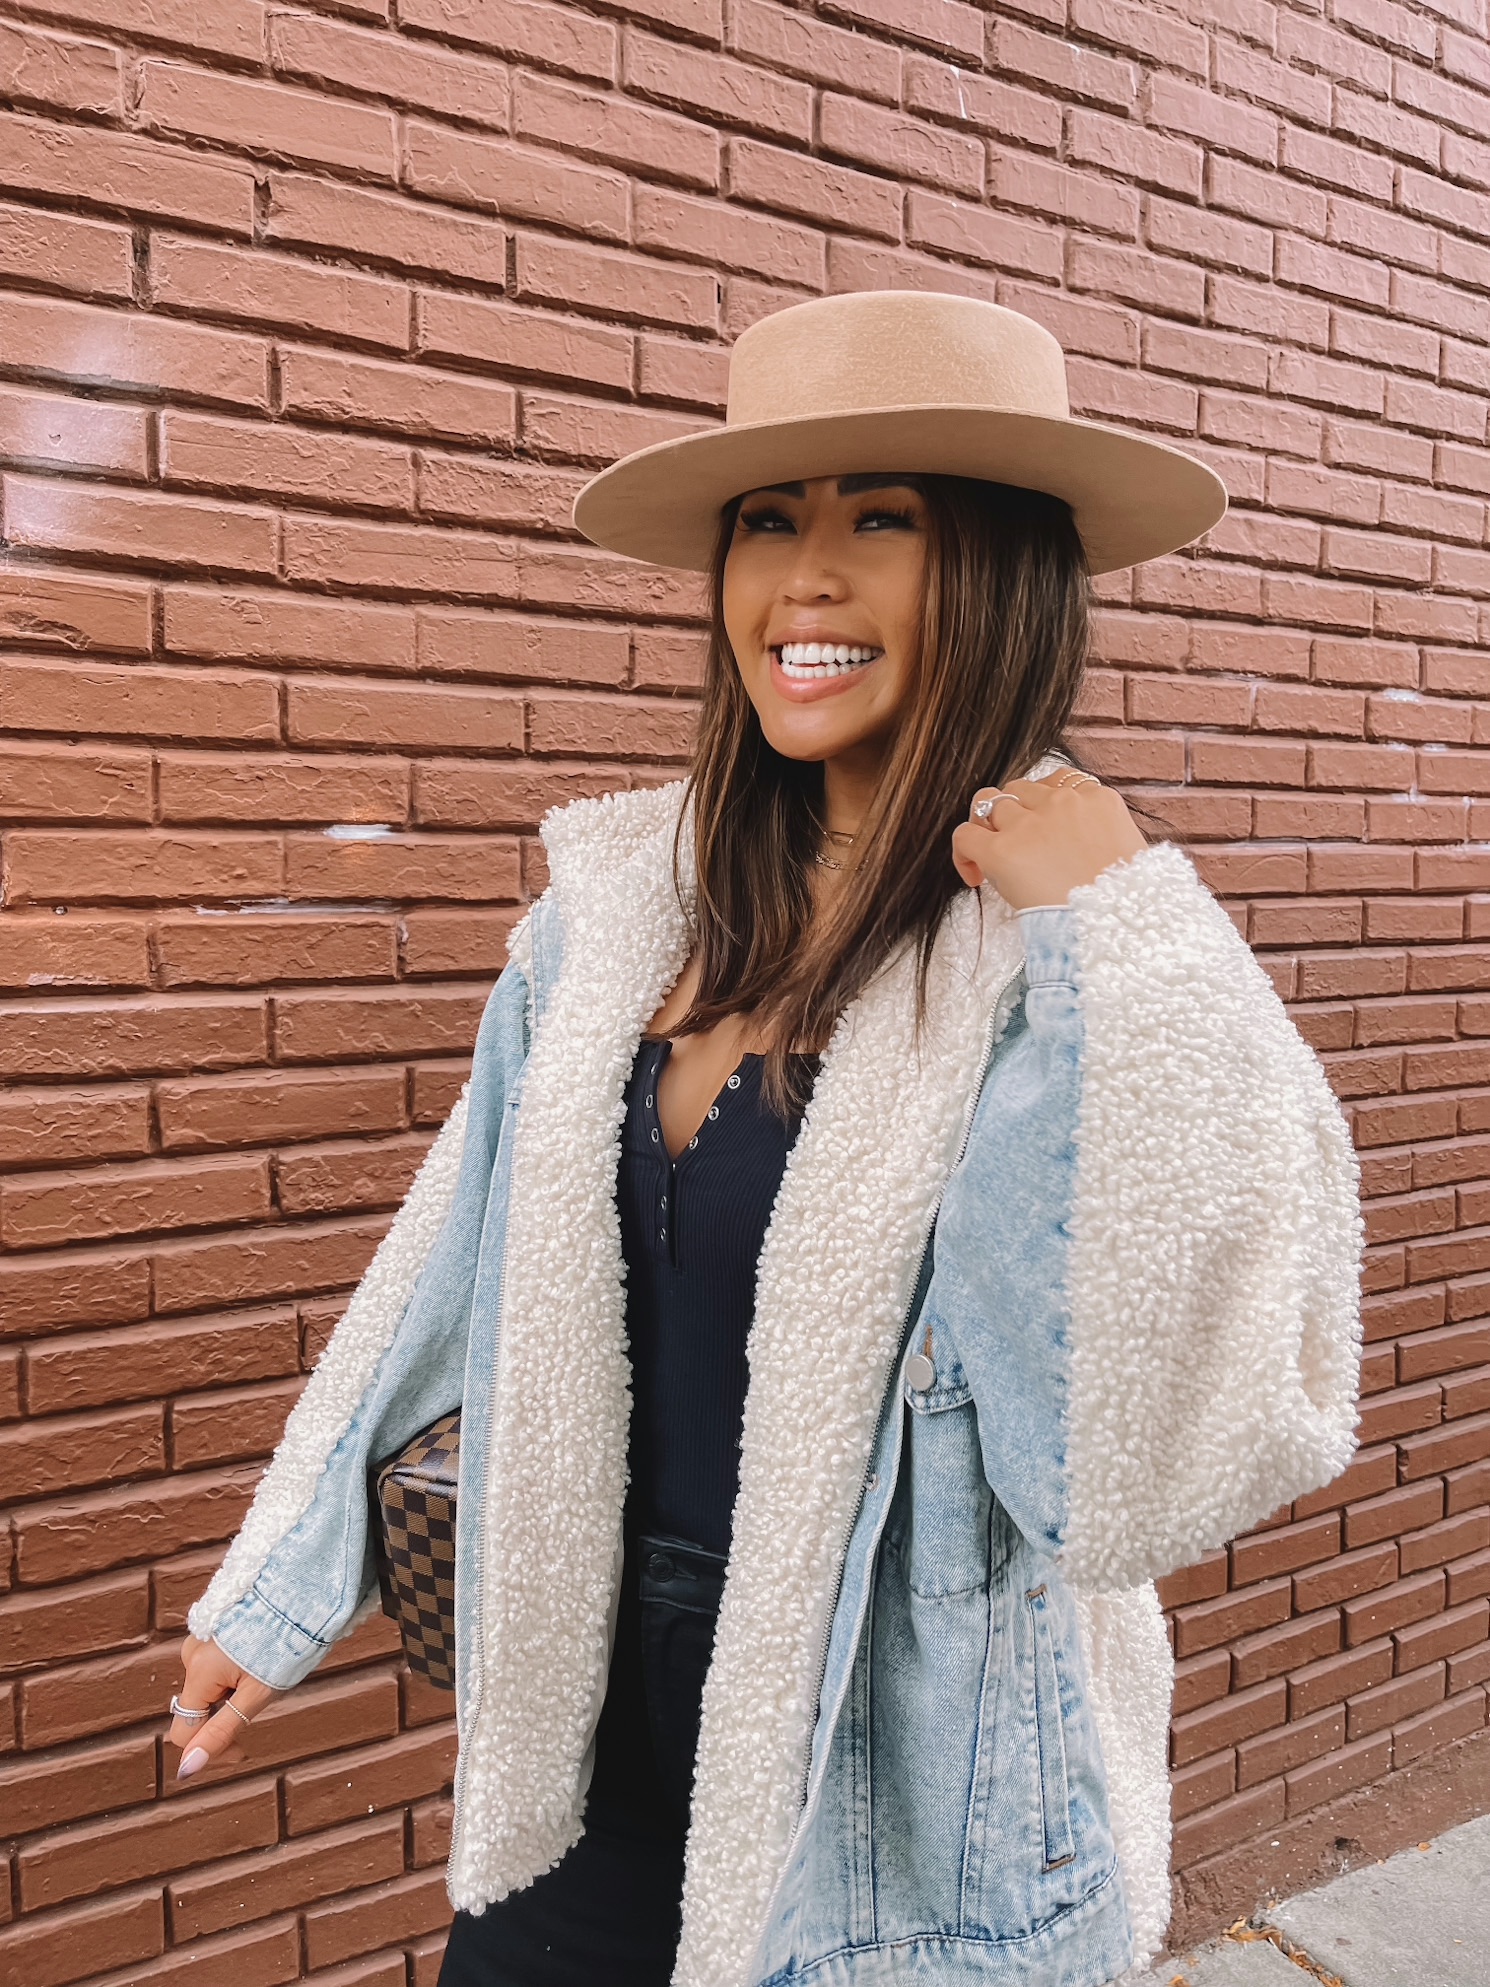 fall shearling jacket - outfit idea x Nordstrom